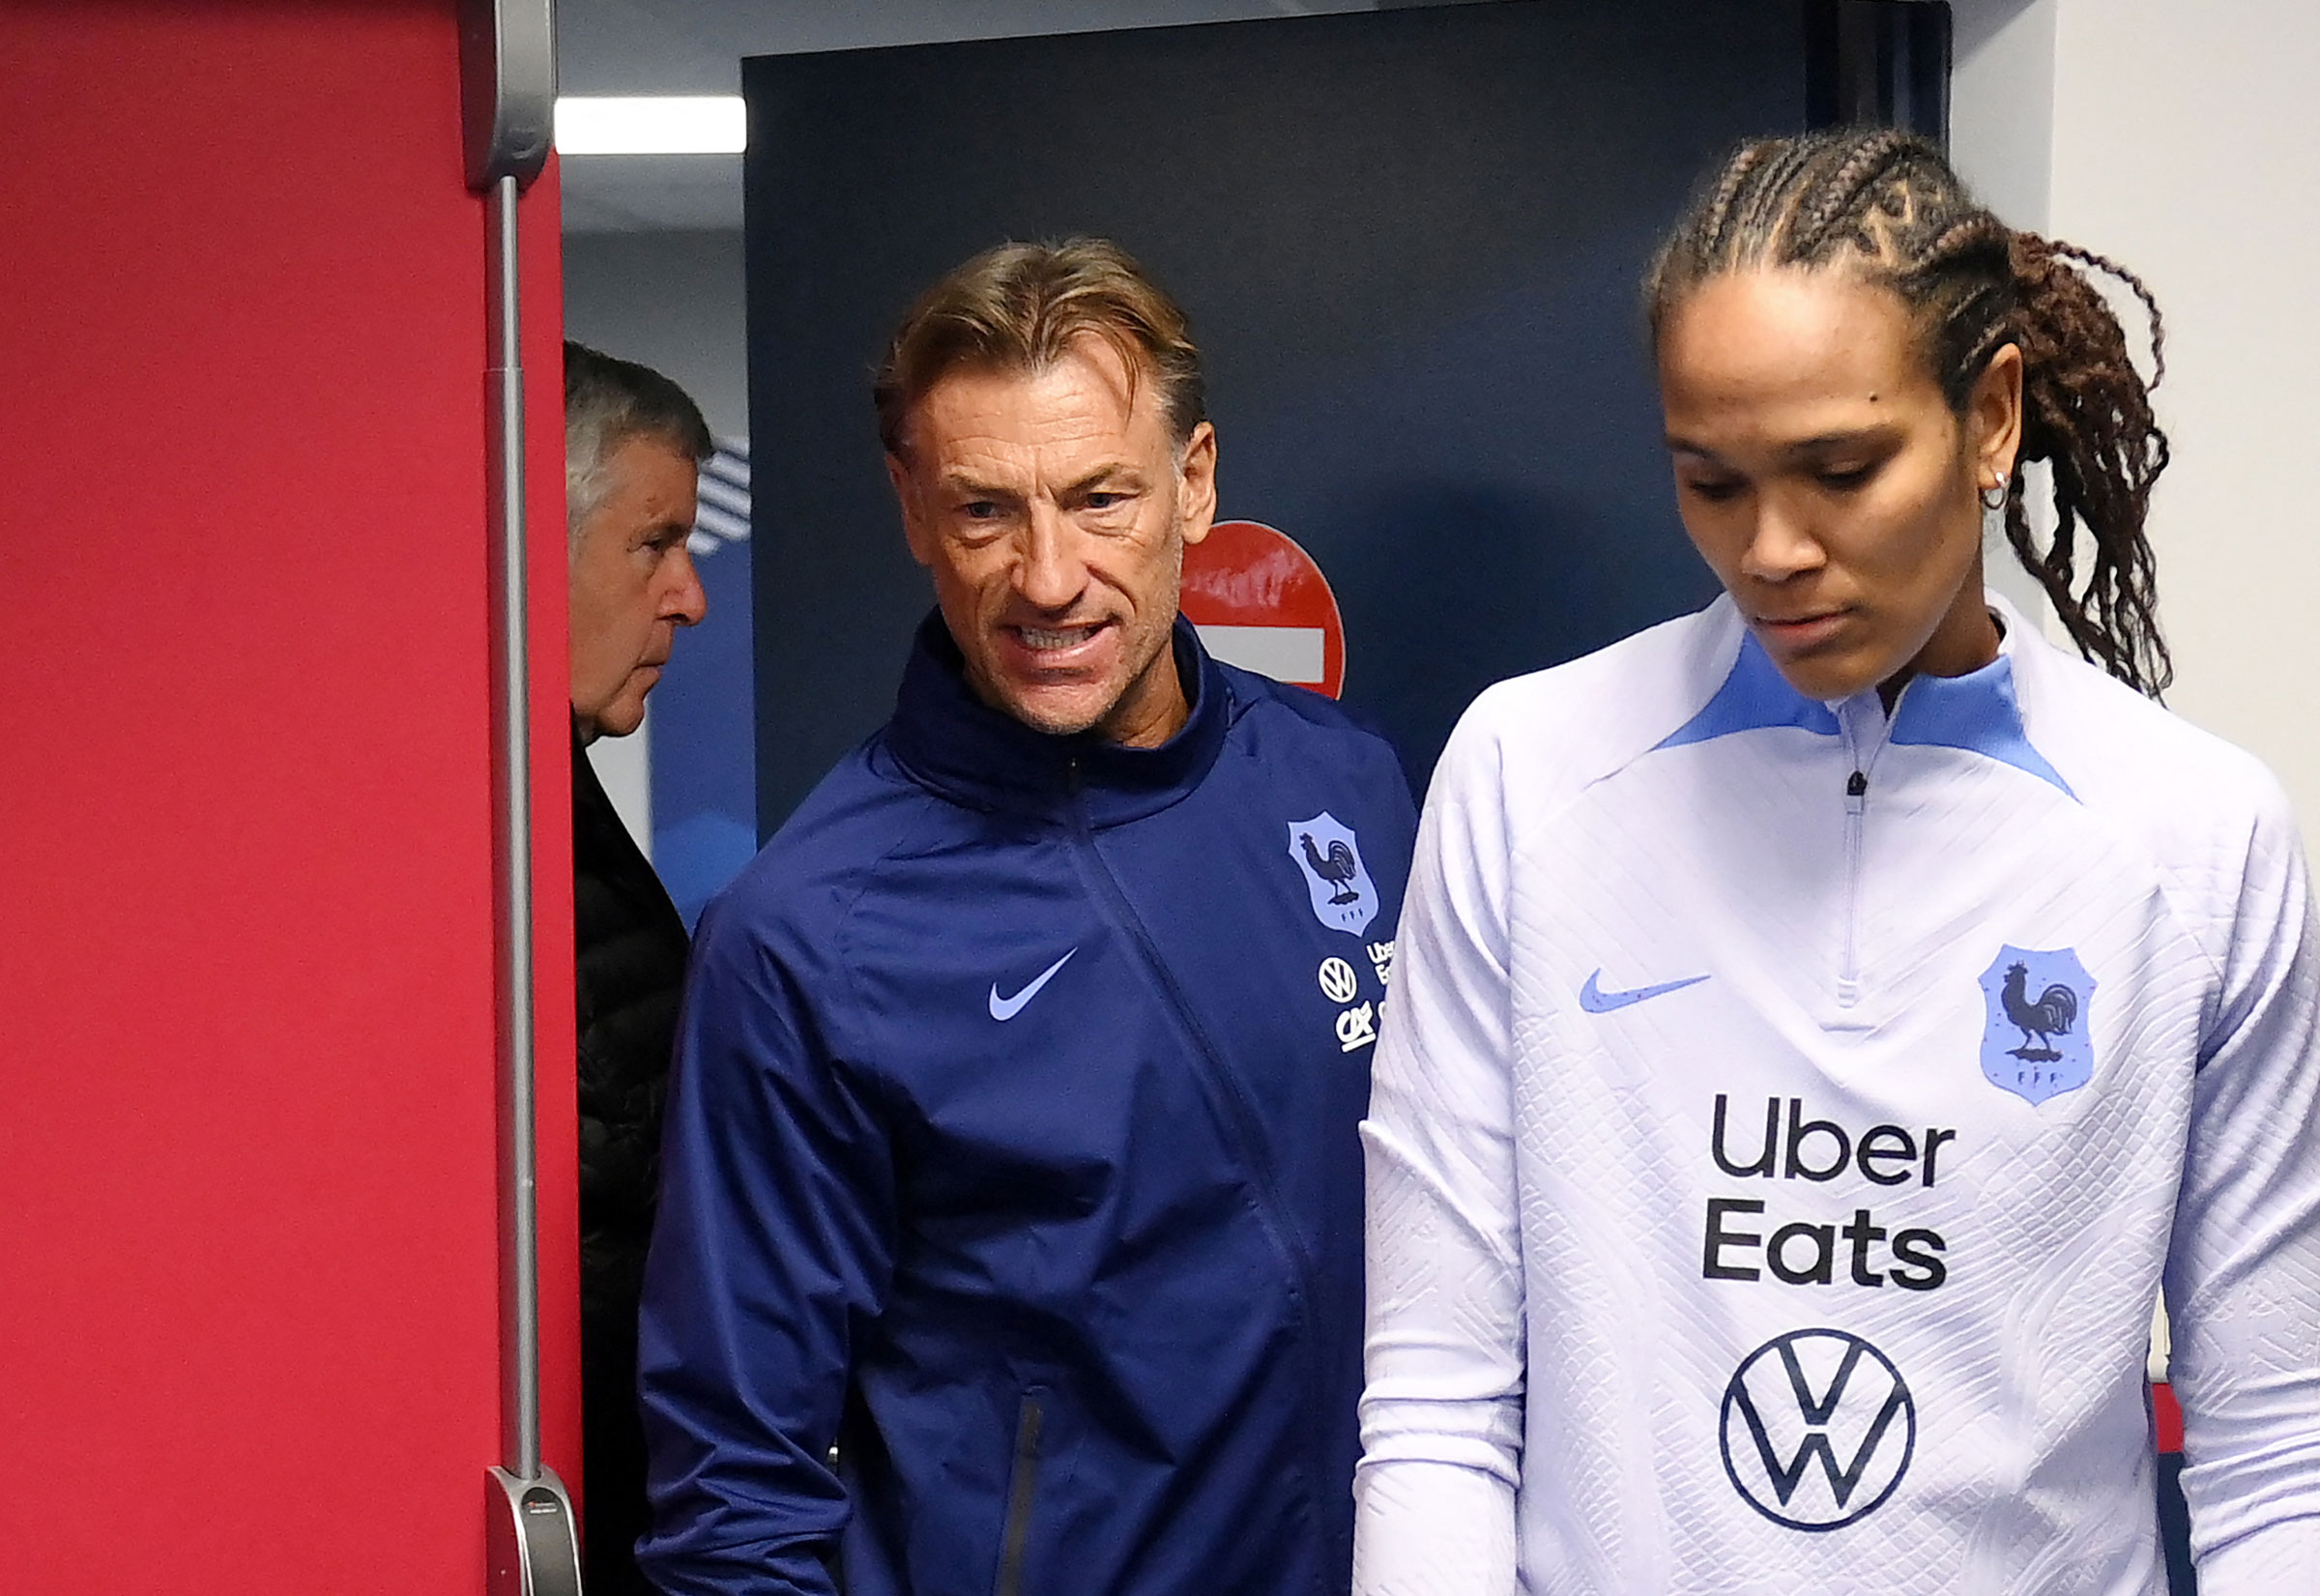 France’s Women’s national football team head coach Hervé Renard and the team’s defender Wendie Renard arrive for a press conference